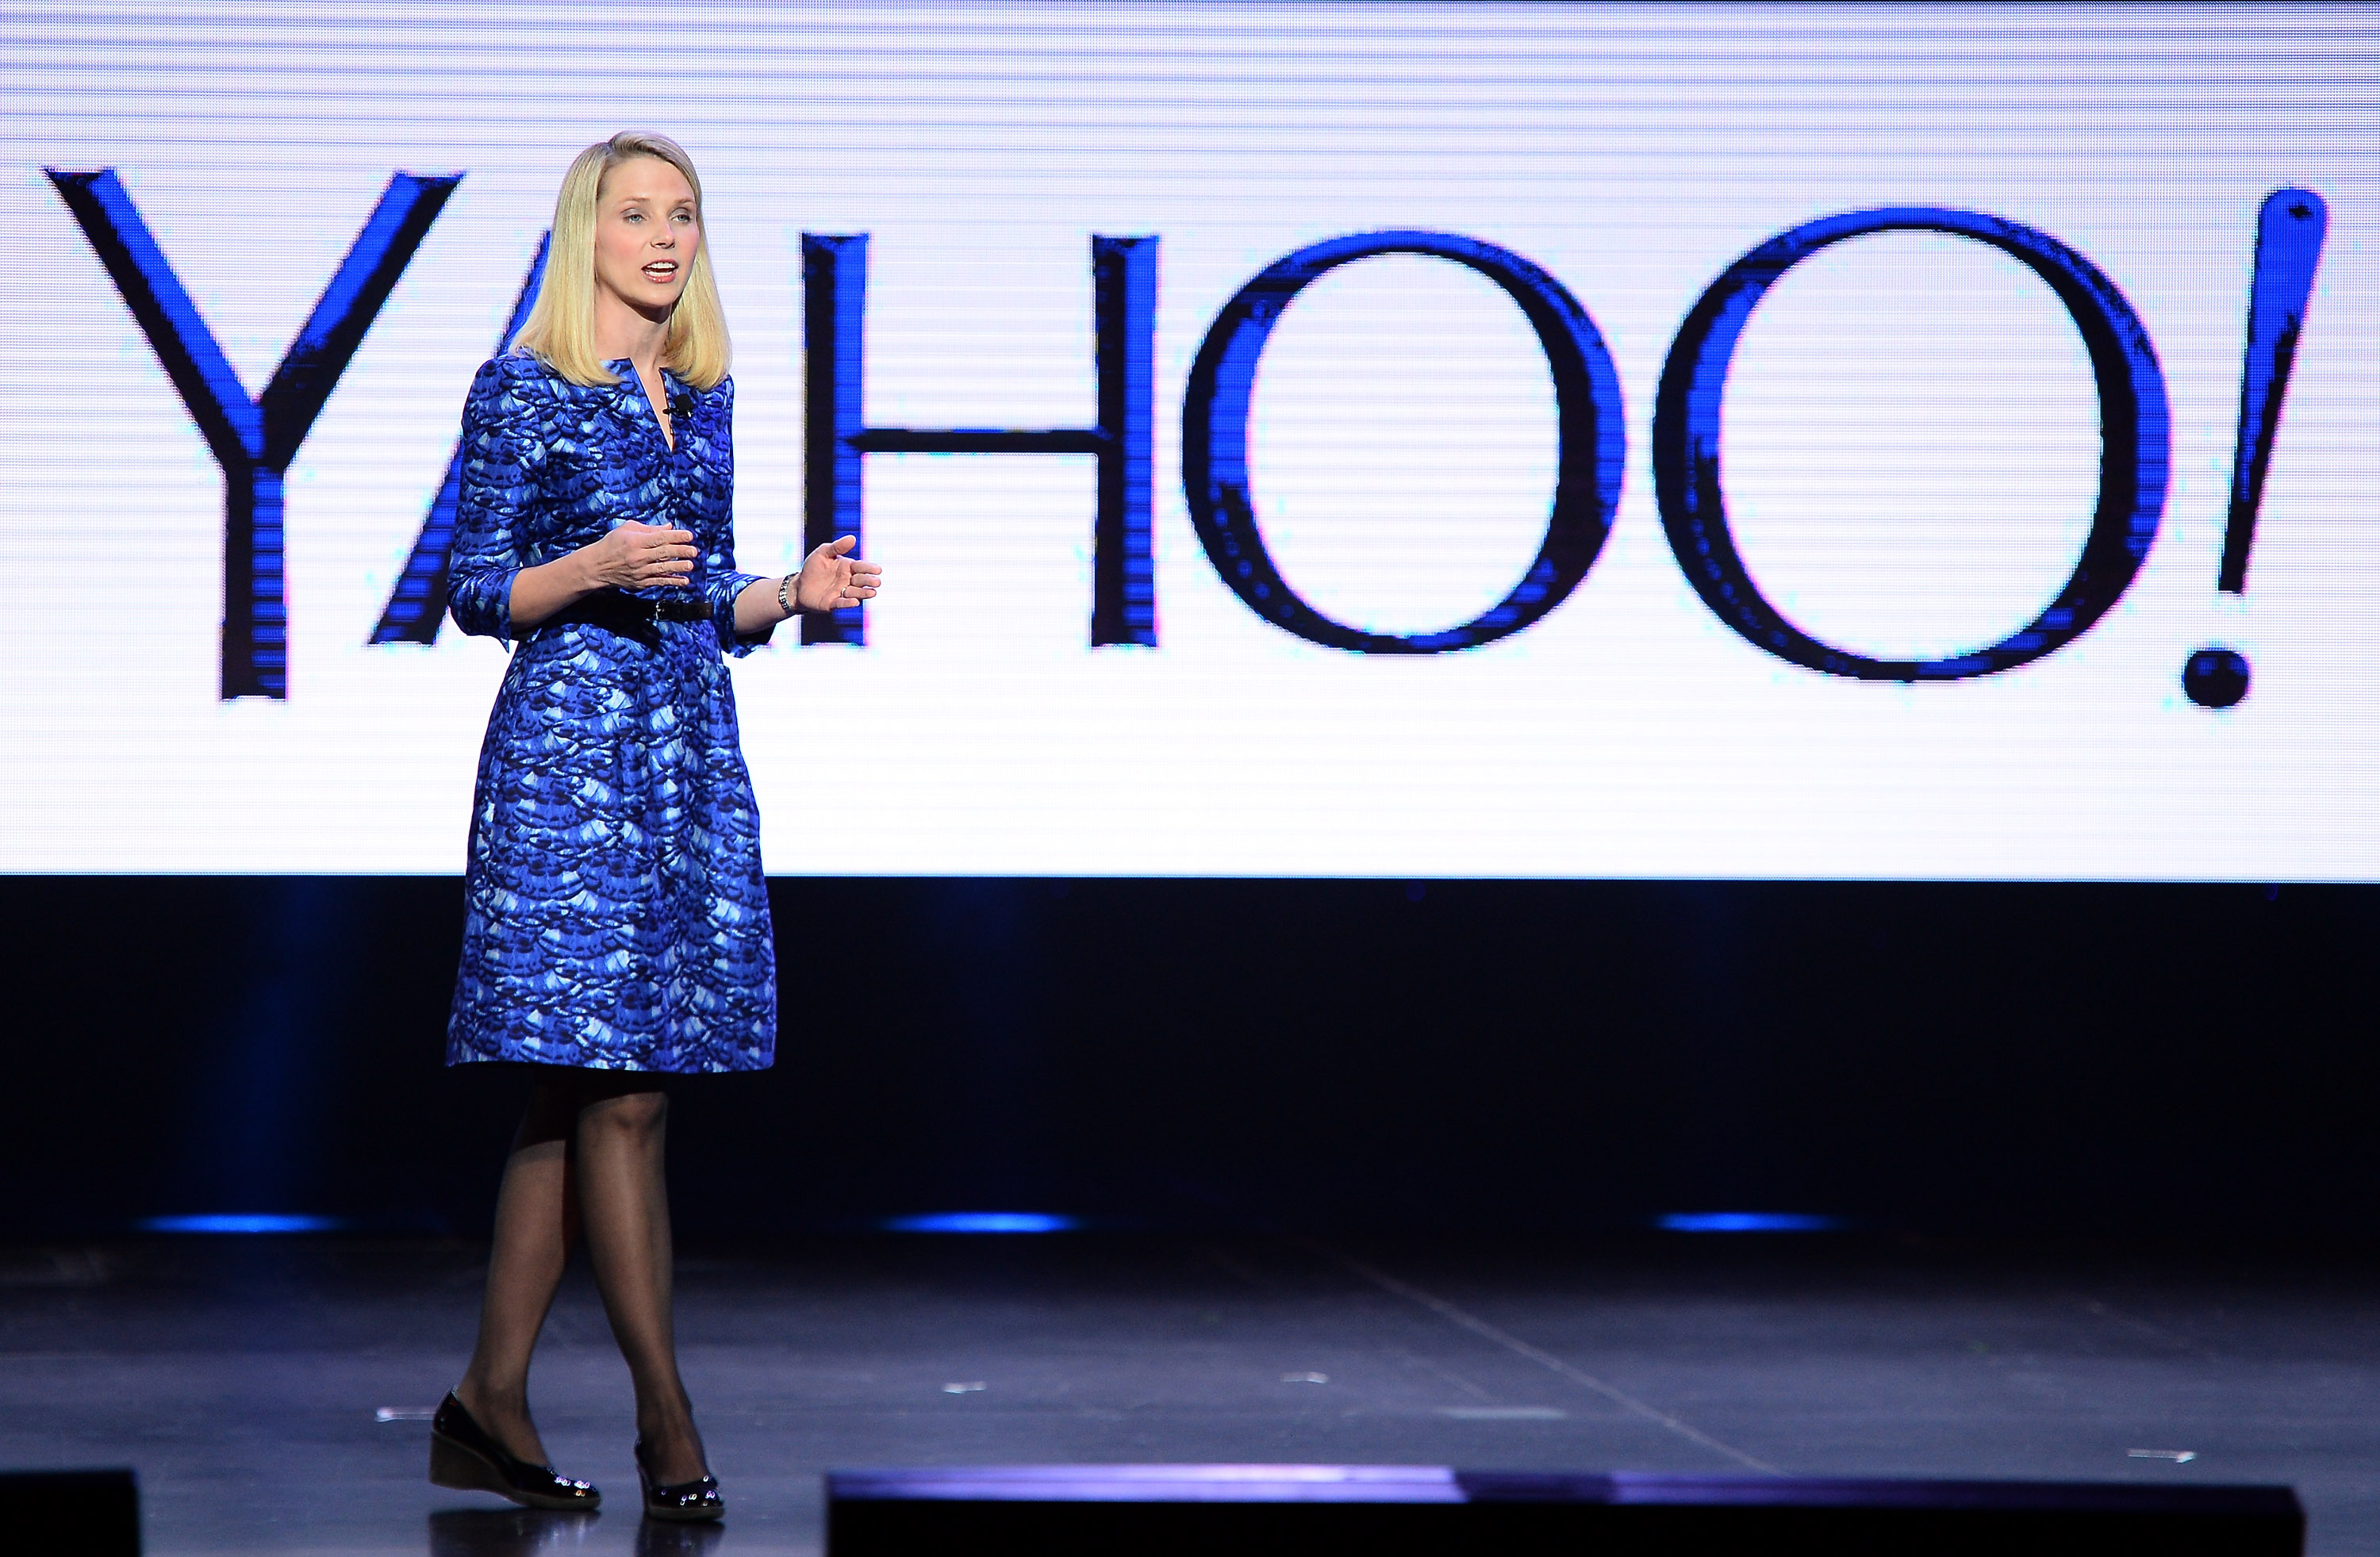 Yahoo! President and CEO Marissa Mayer delivers a keynote address at the 2014 International CES in Las Vegas, Nevada.